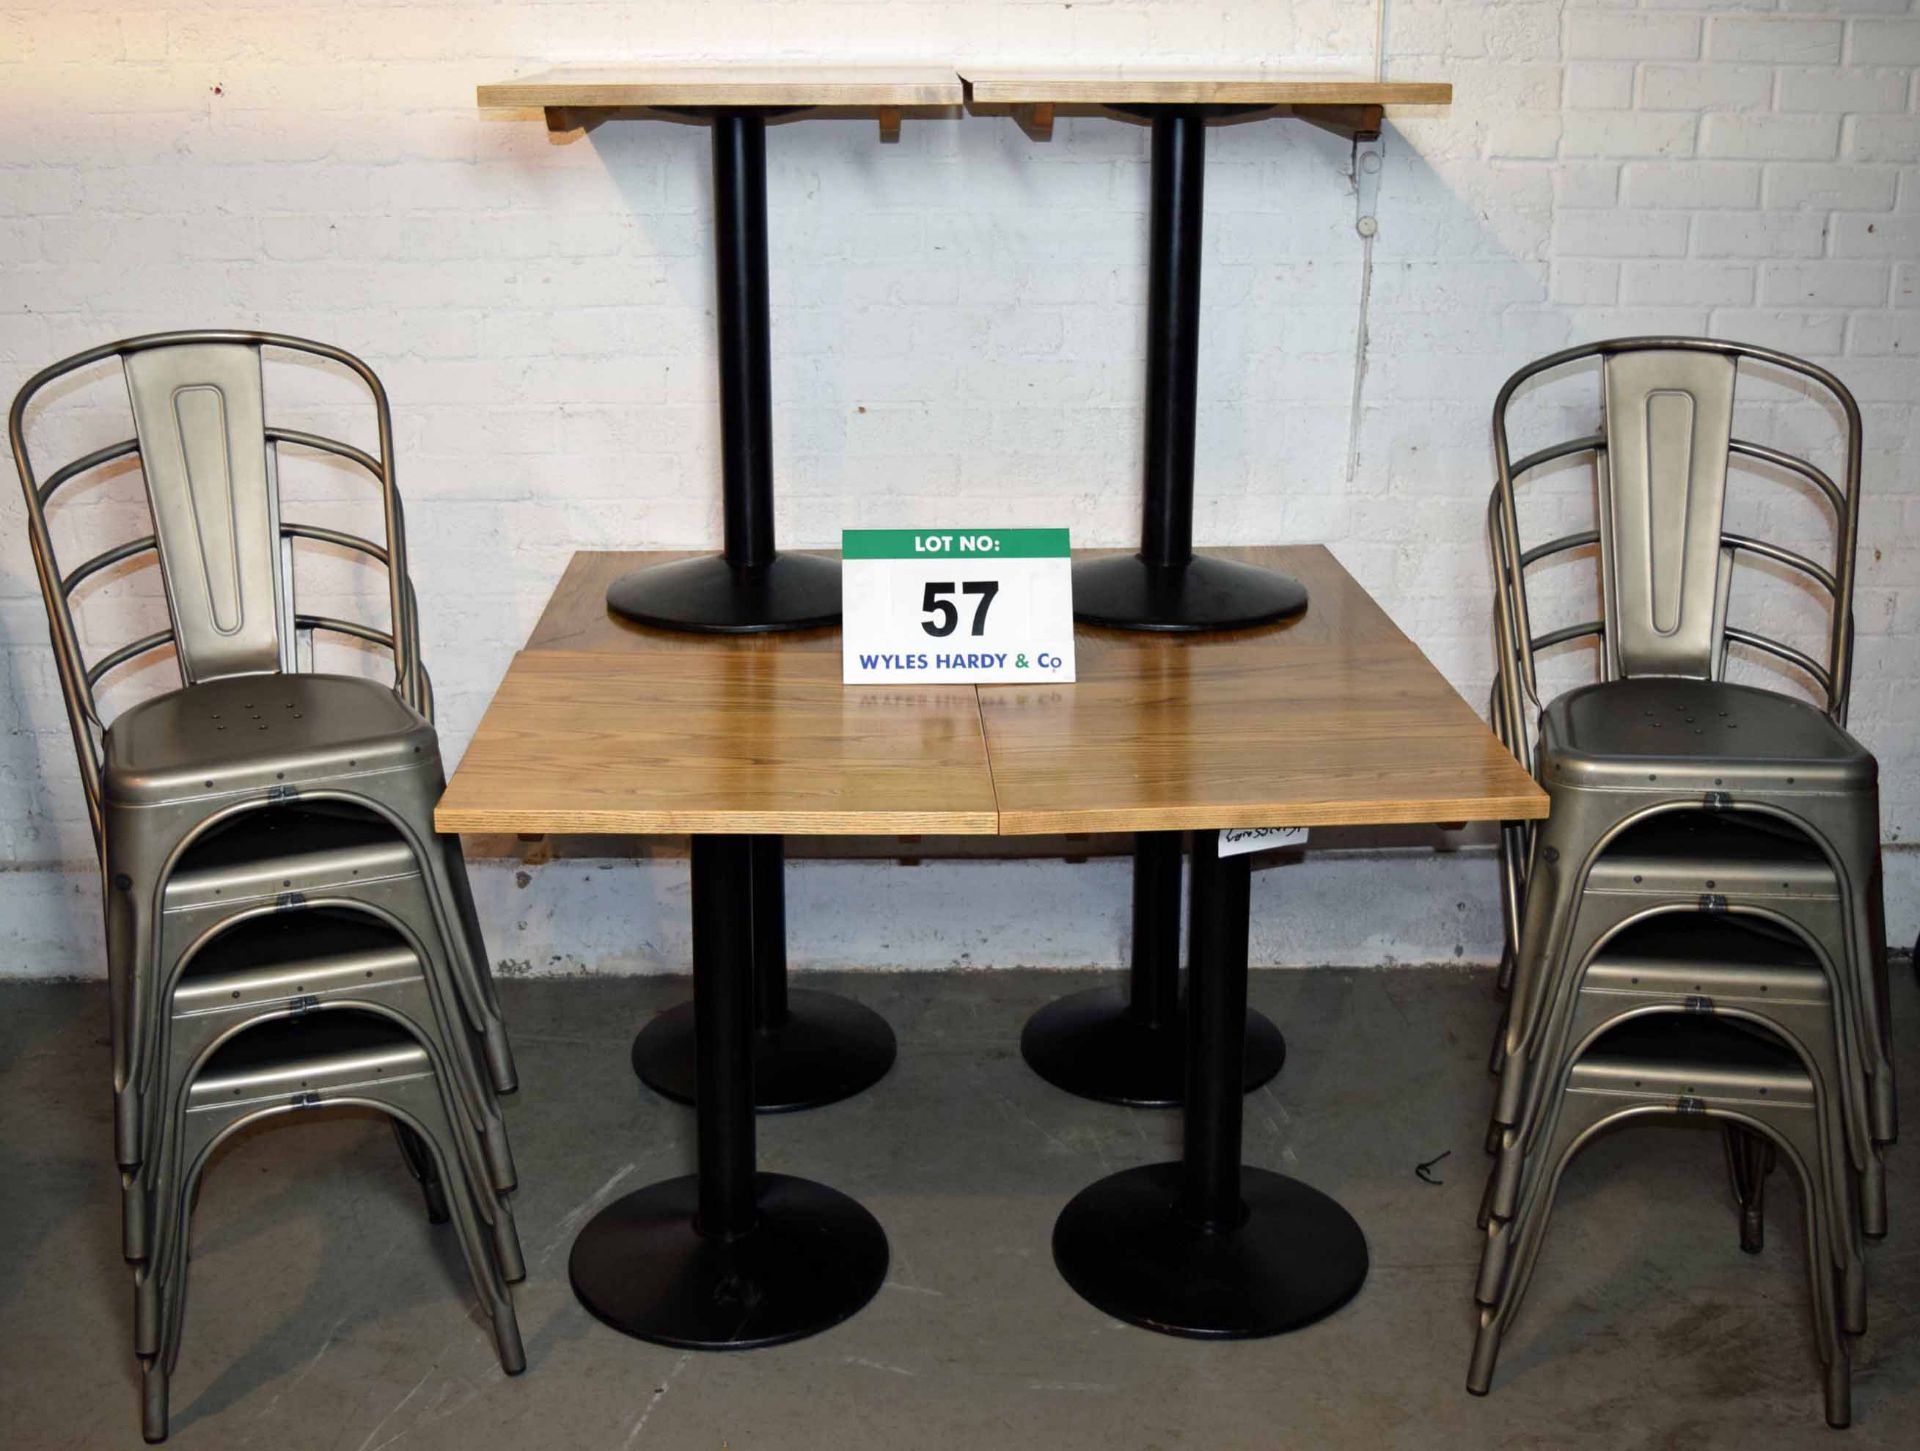 Six 600mm x 600mm Solid Oak Café Tables with Heavy Duty Pedestal Base & Adjustable Feet and Eight